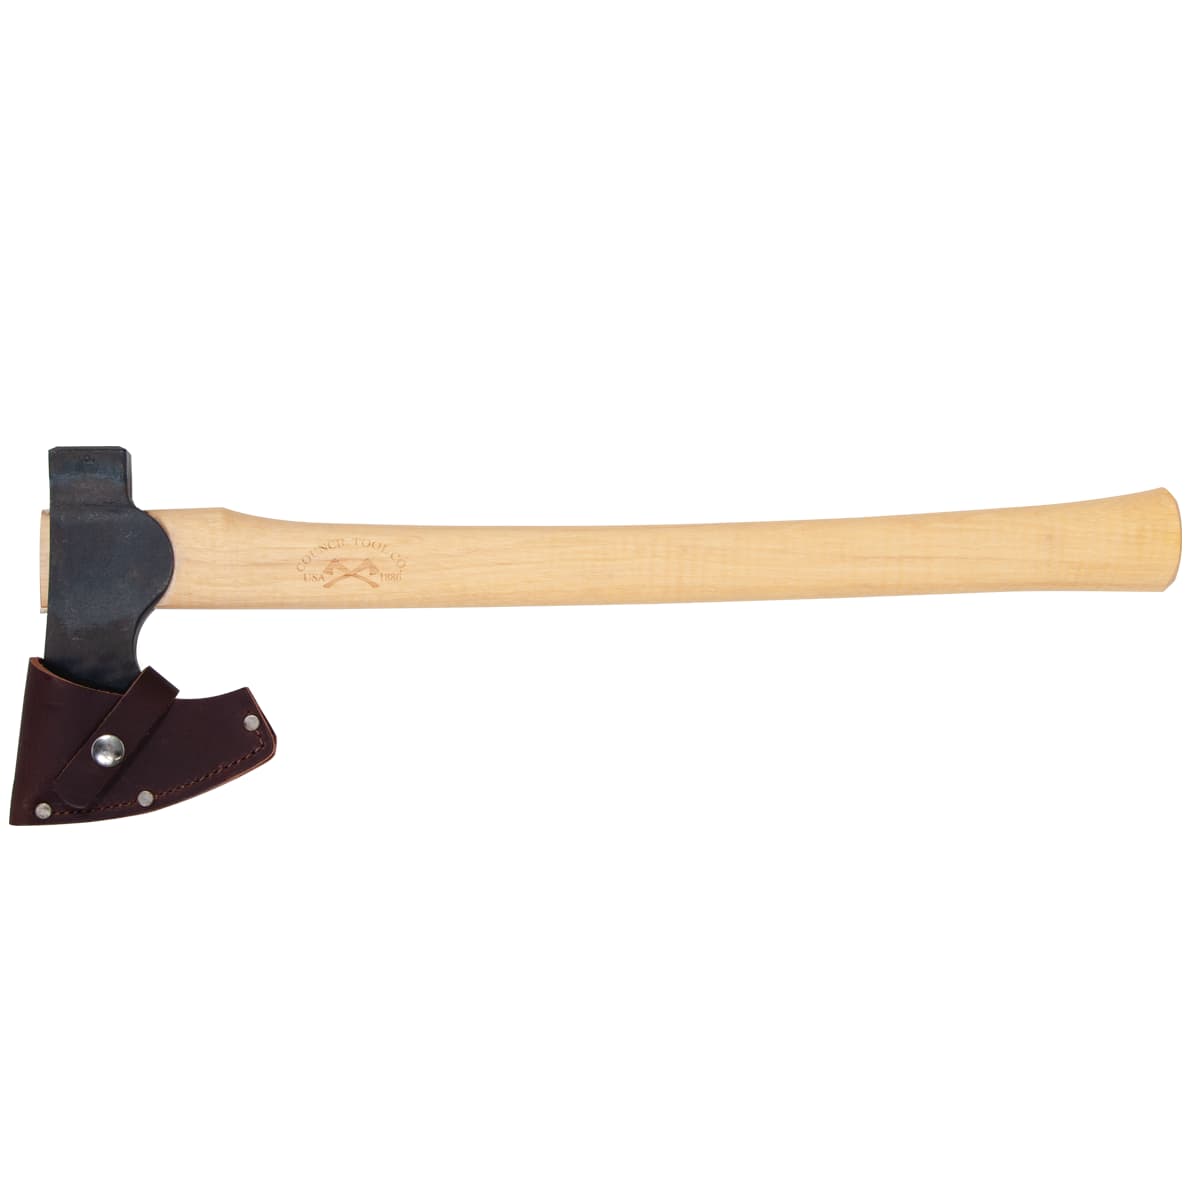 Wood-Craft Camp Carver Axe - 22